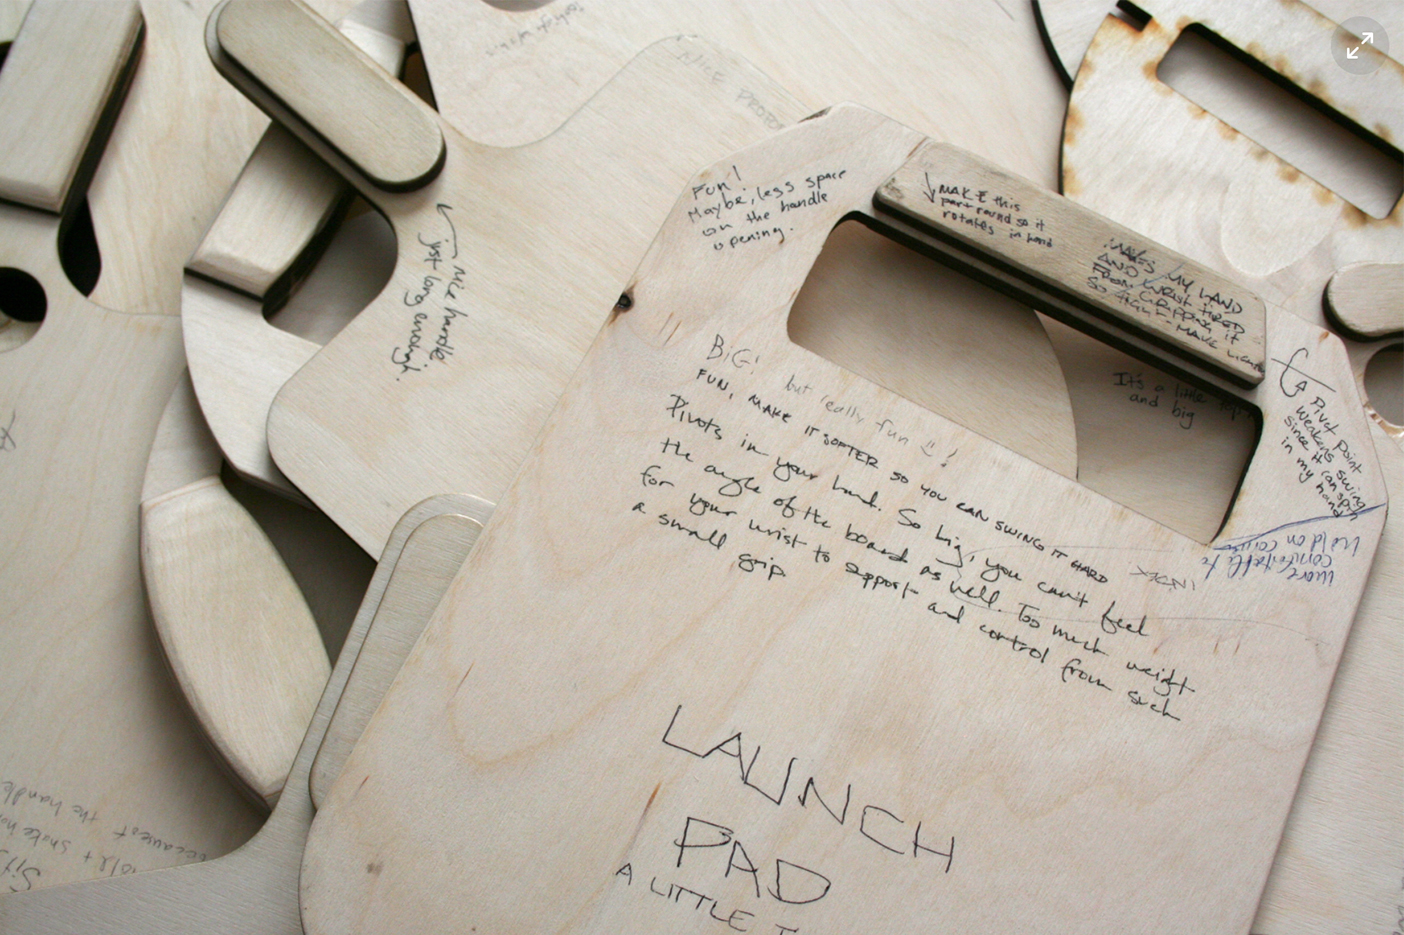 A closeup of plywood paddle iterations with writing scrawled on the paddles.